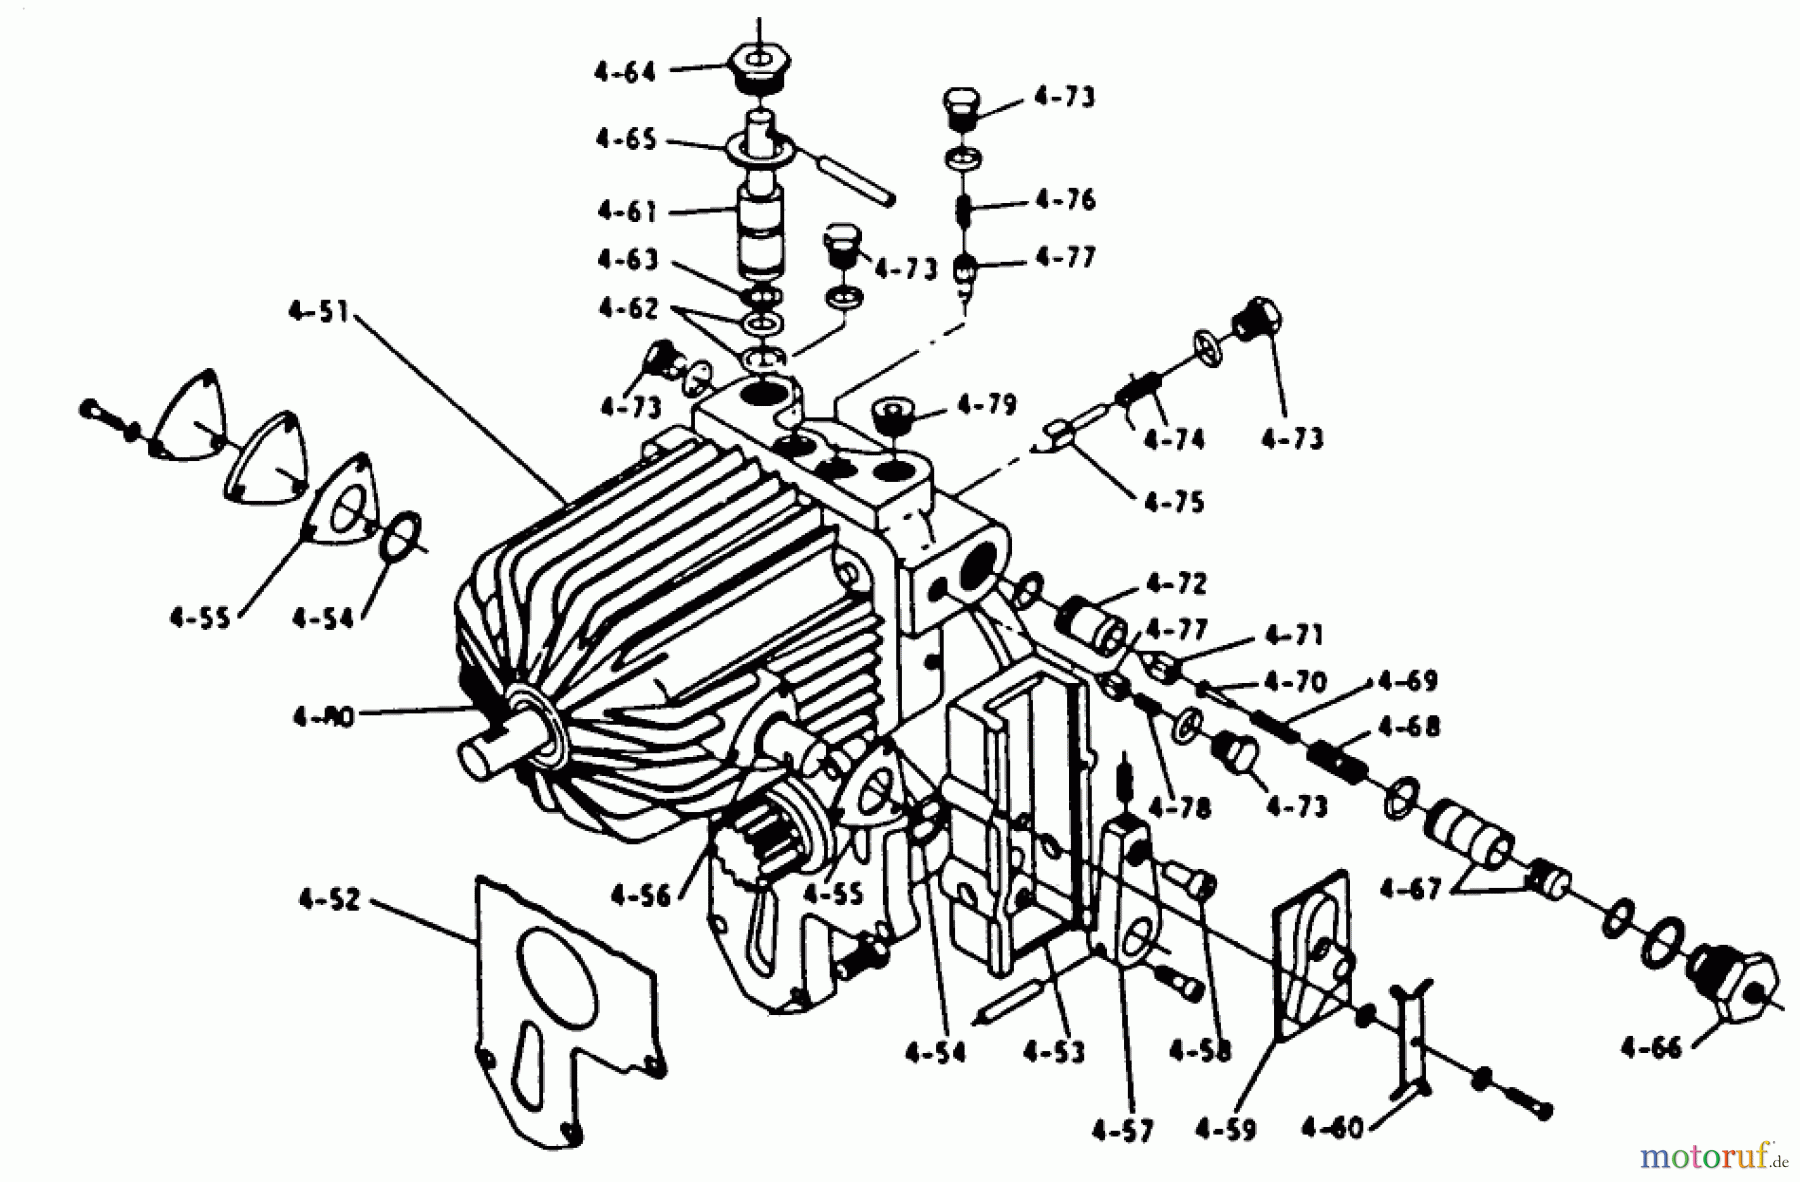  Toro Neu Mowers, Lawn & Garden Tractor Seite 1 1-0440 - Toro 16 hp Automatic Tractor, 1973 PARTS LIST FOR 4.050 HYDROGEAR (PLATE 4.4)